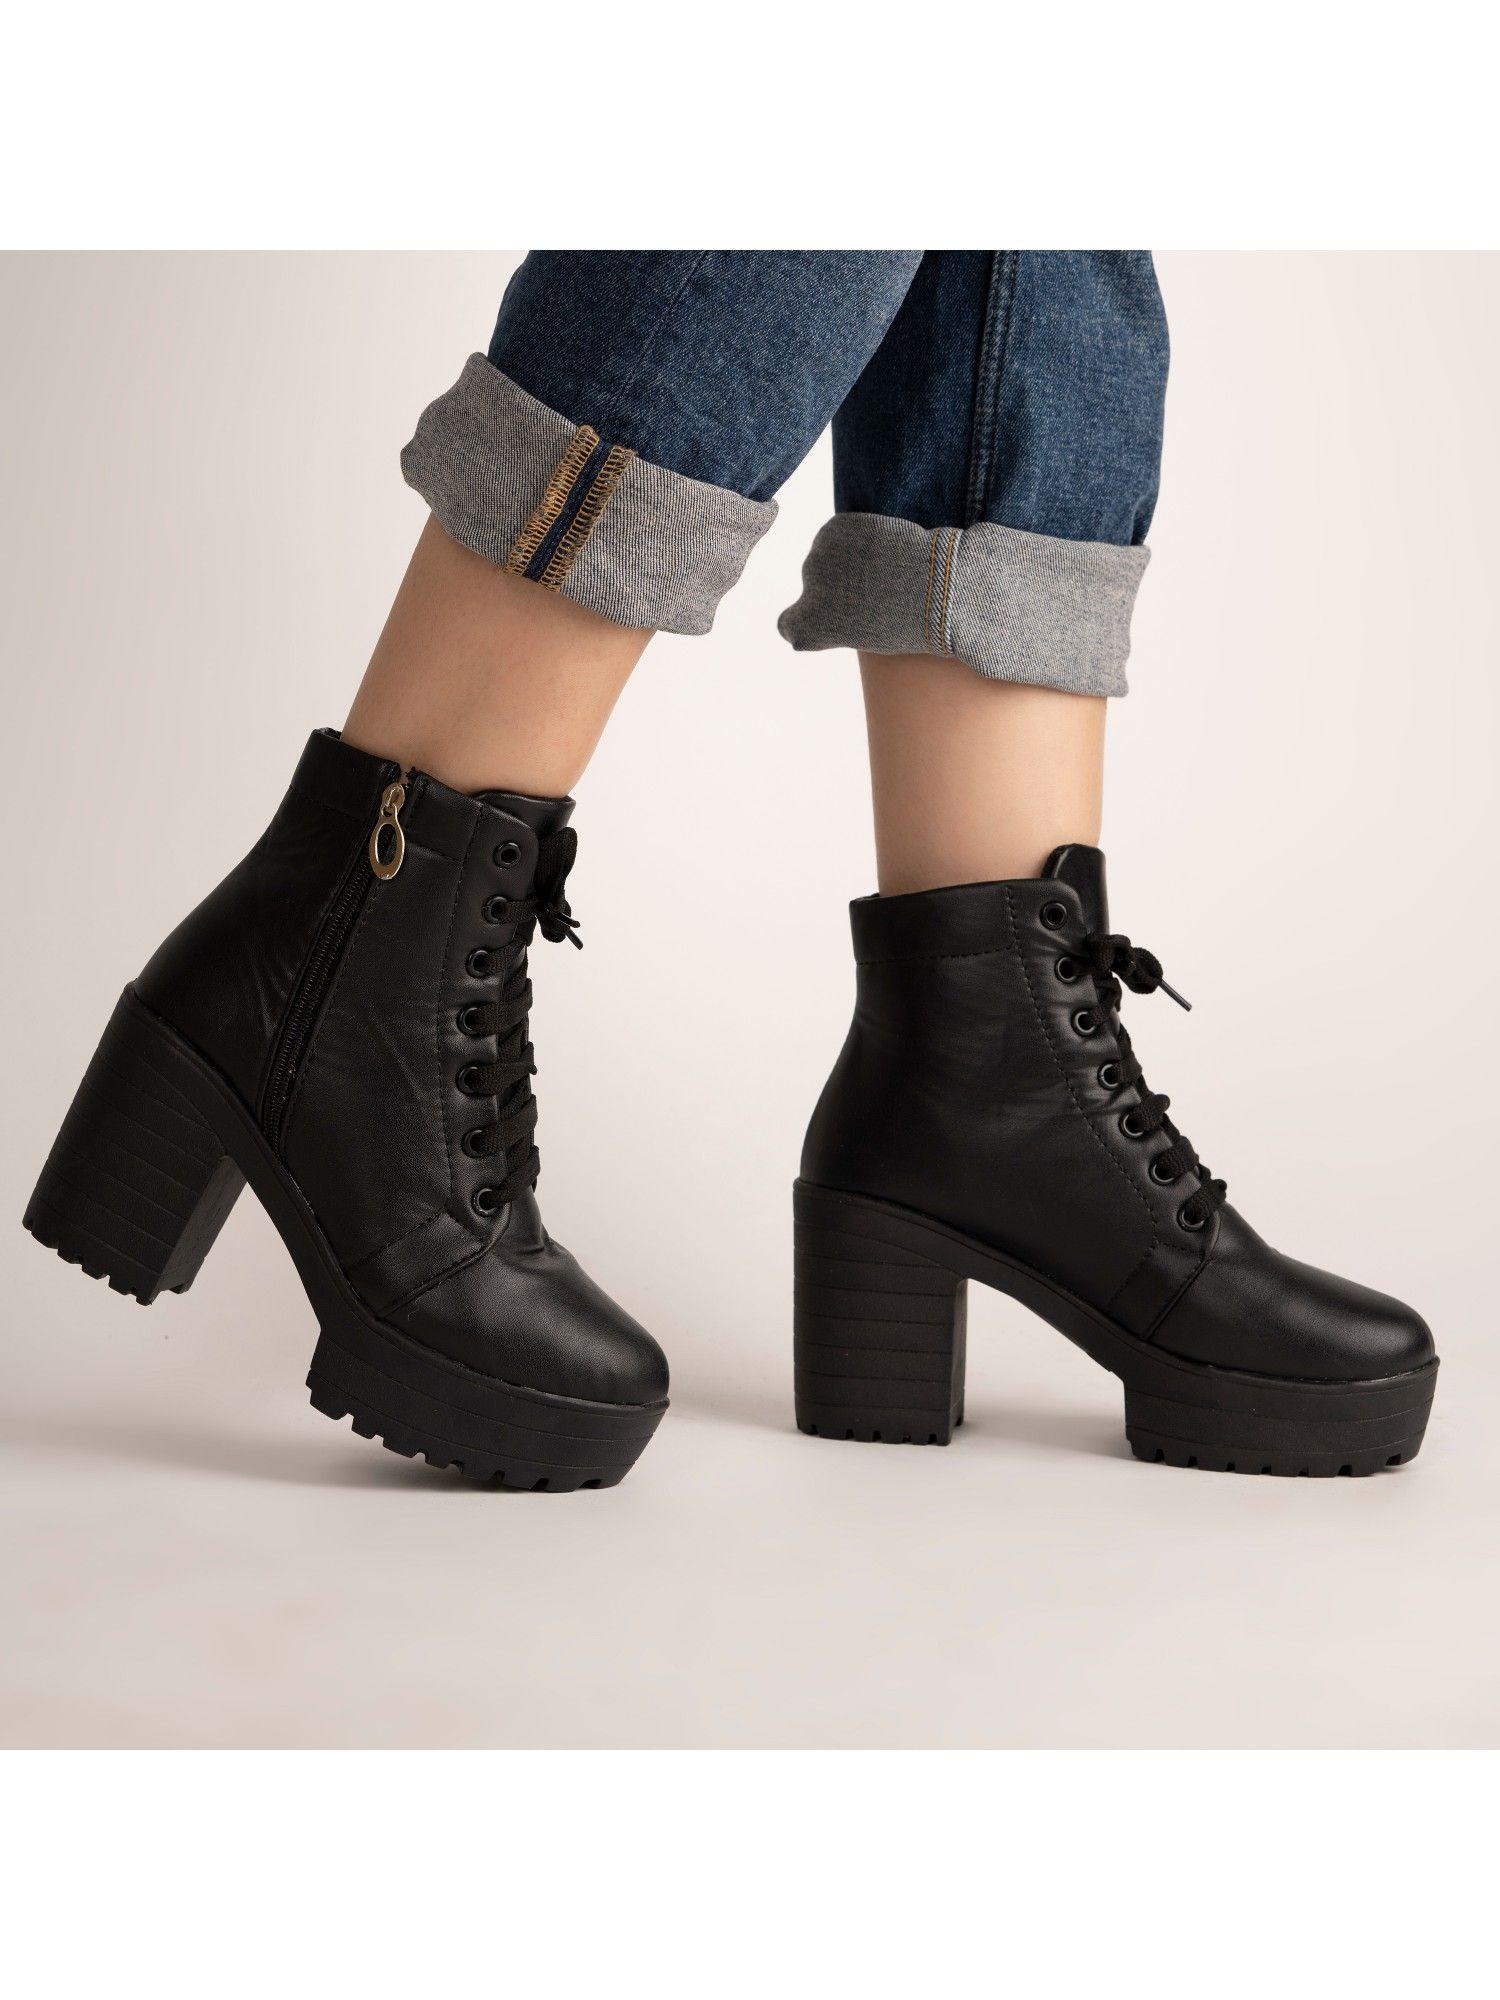 boots-trendy-casual-party-wear-daily-wear-comfortable-stylish-boots-for-girls